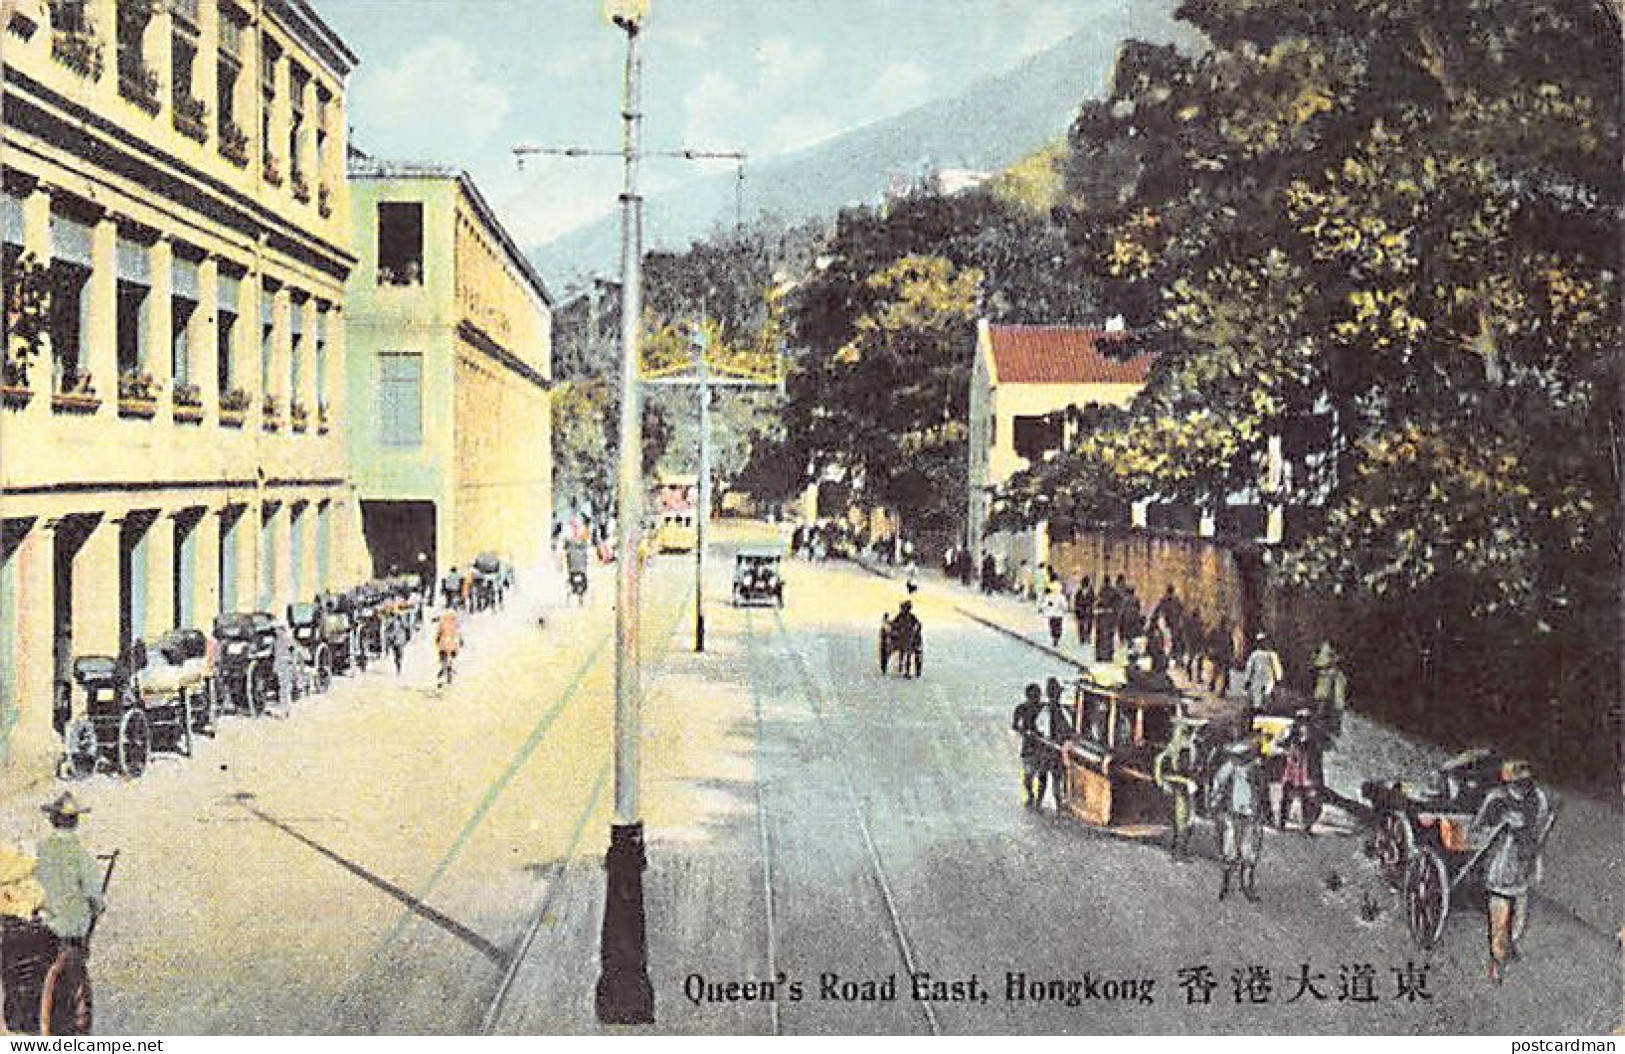 China - HONG KONG - Queen's Road East - Publ. The Graeco Egyptian Tobacco Store 25 - Chine (Hong Kong)